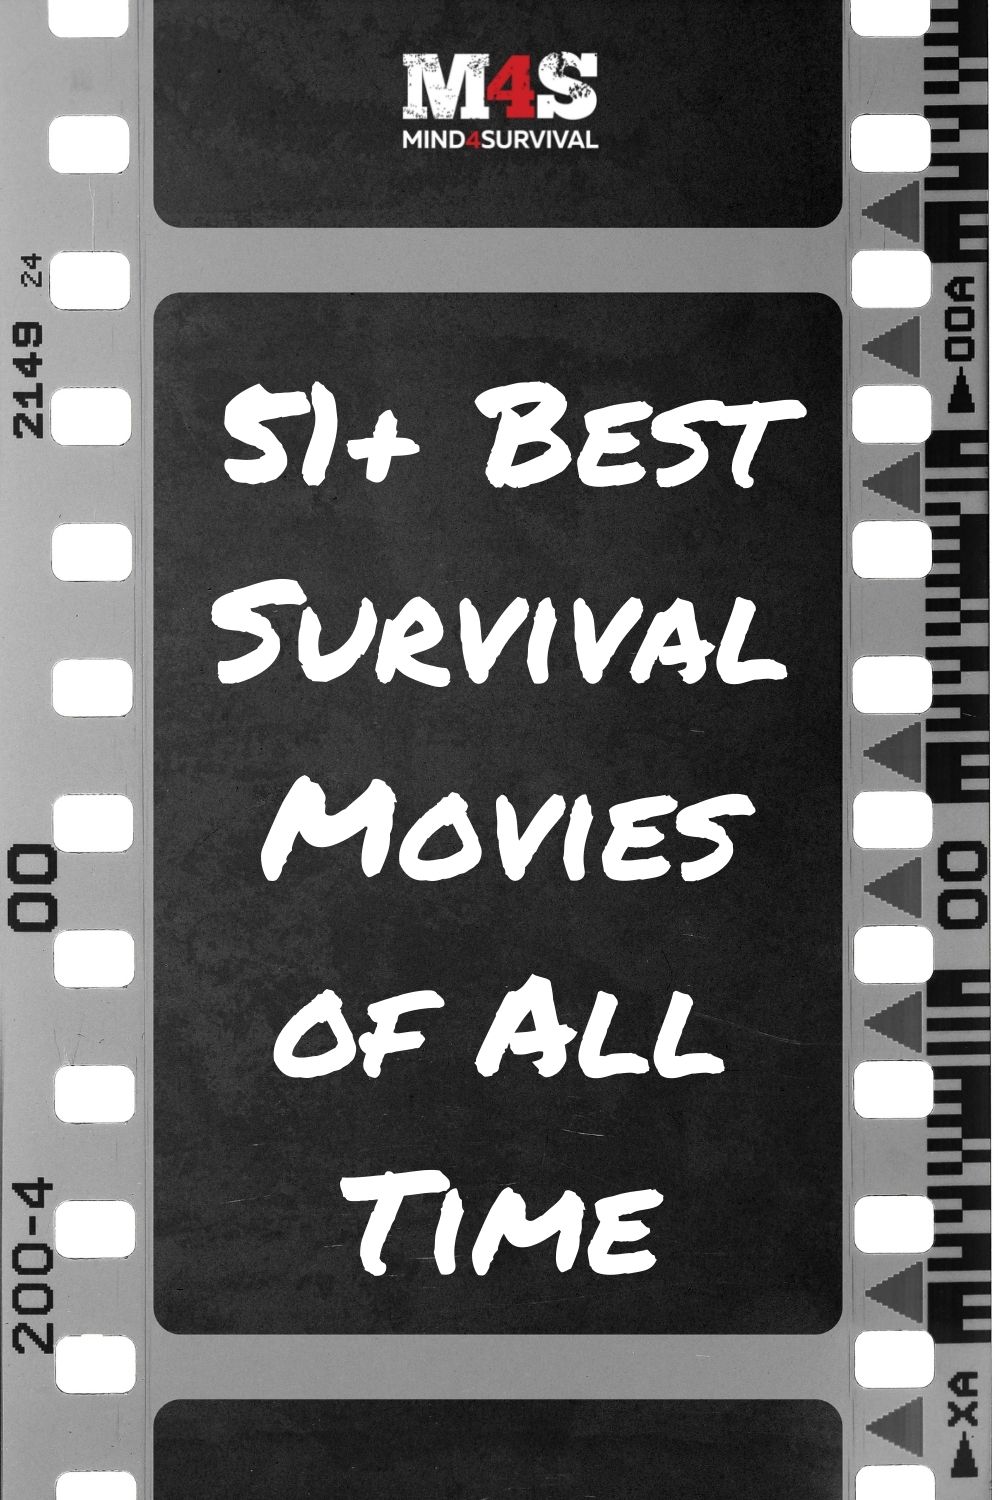 51+ Best Survival Movies of All Time - Watch Now! (2022)